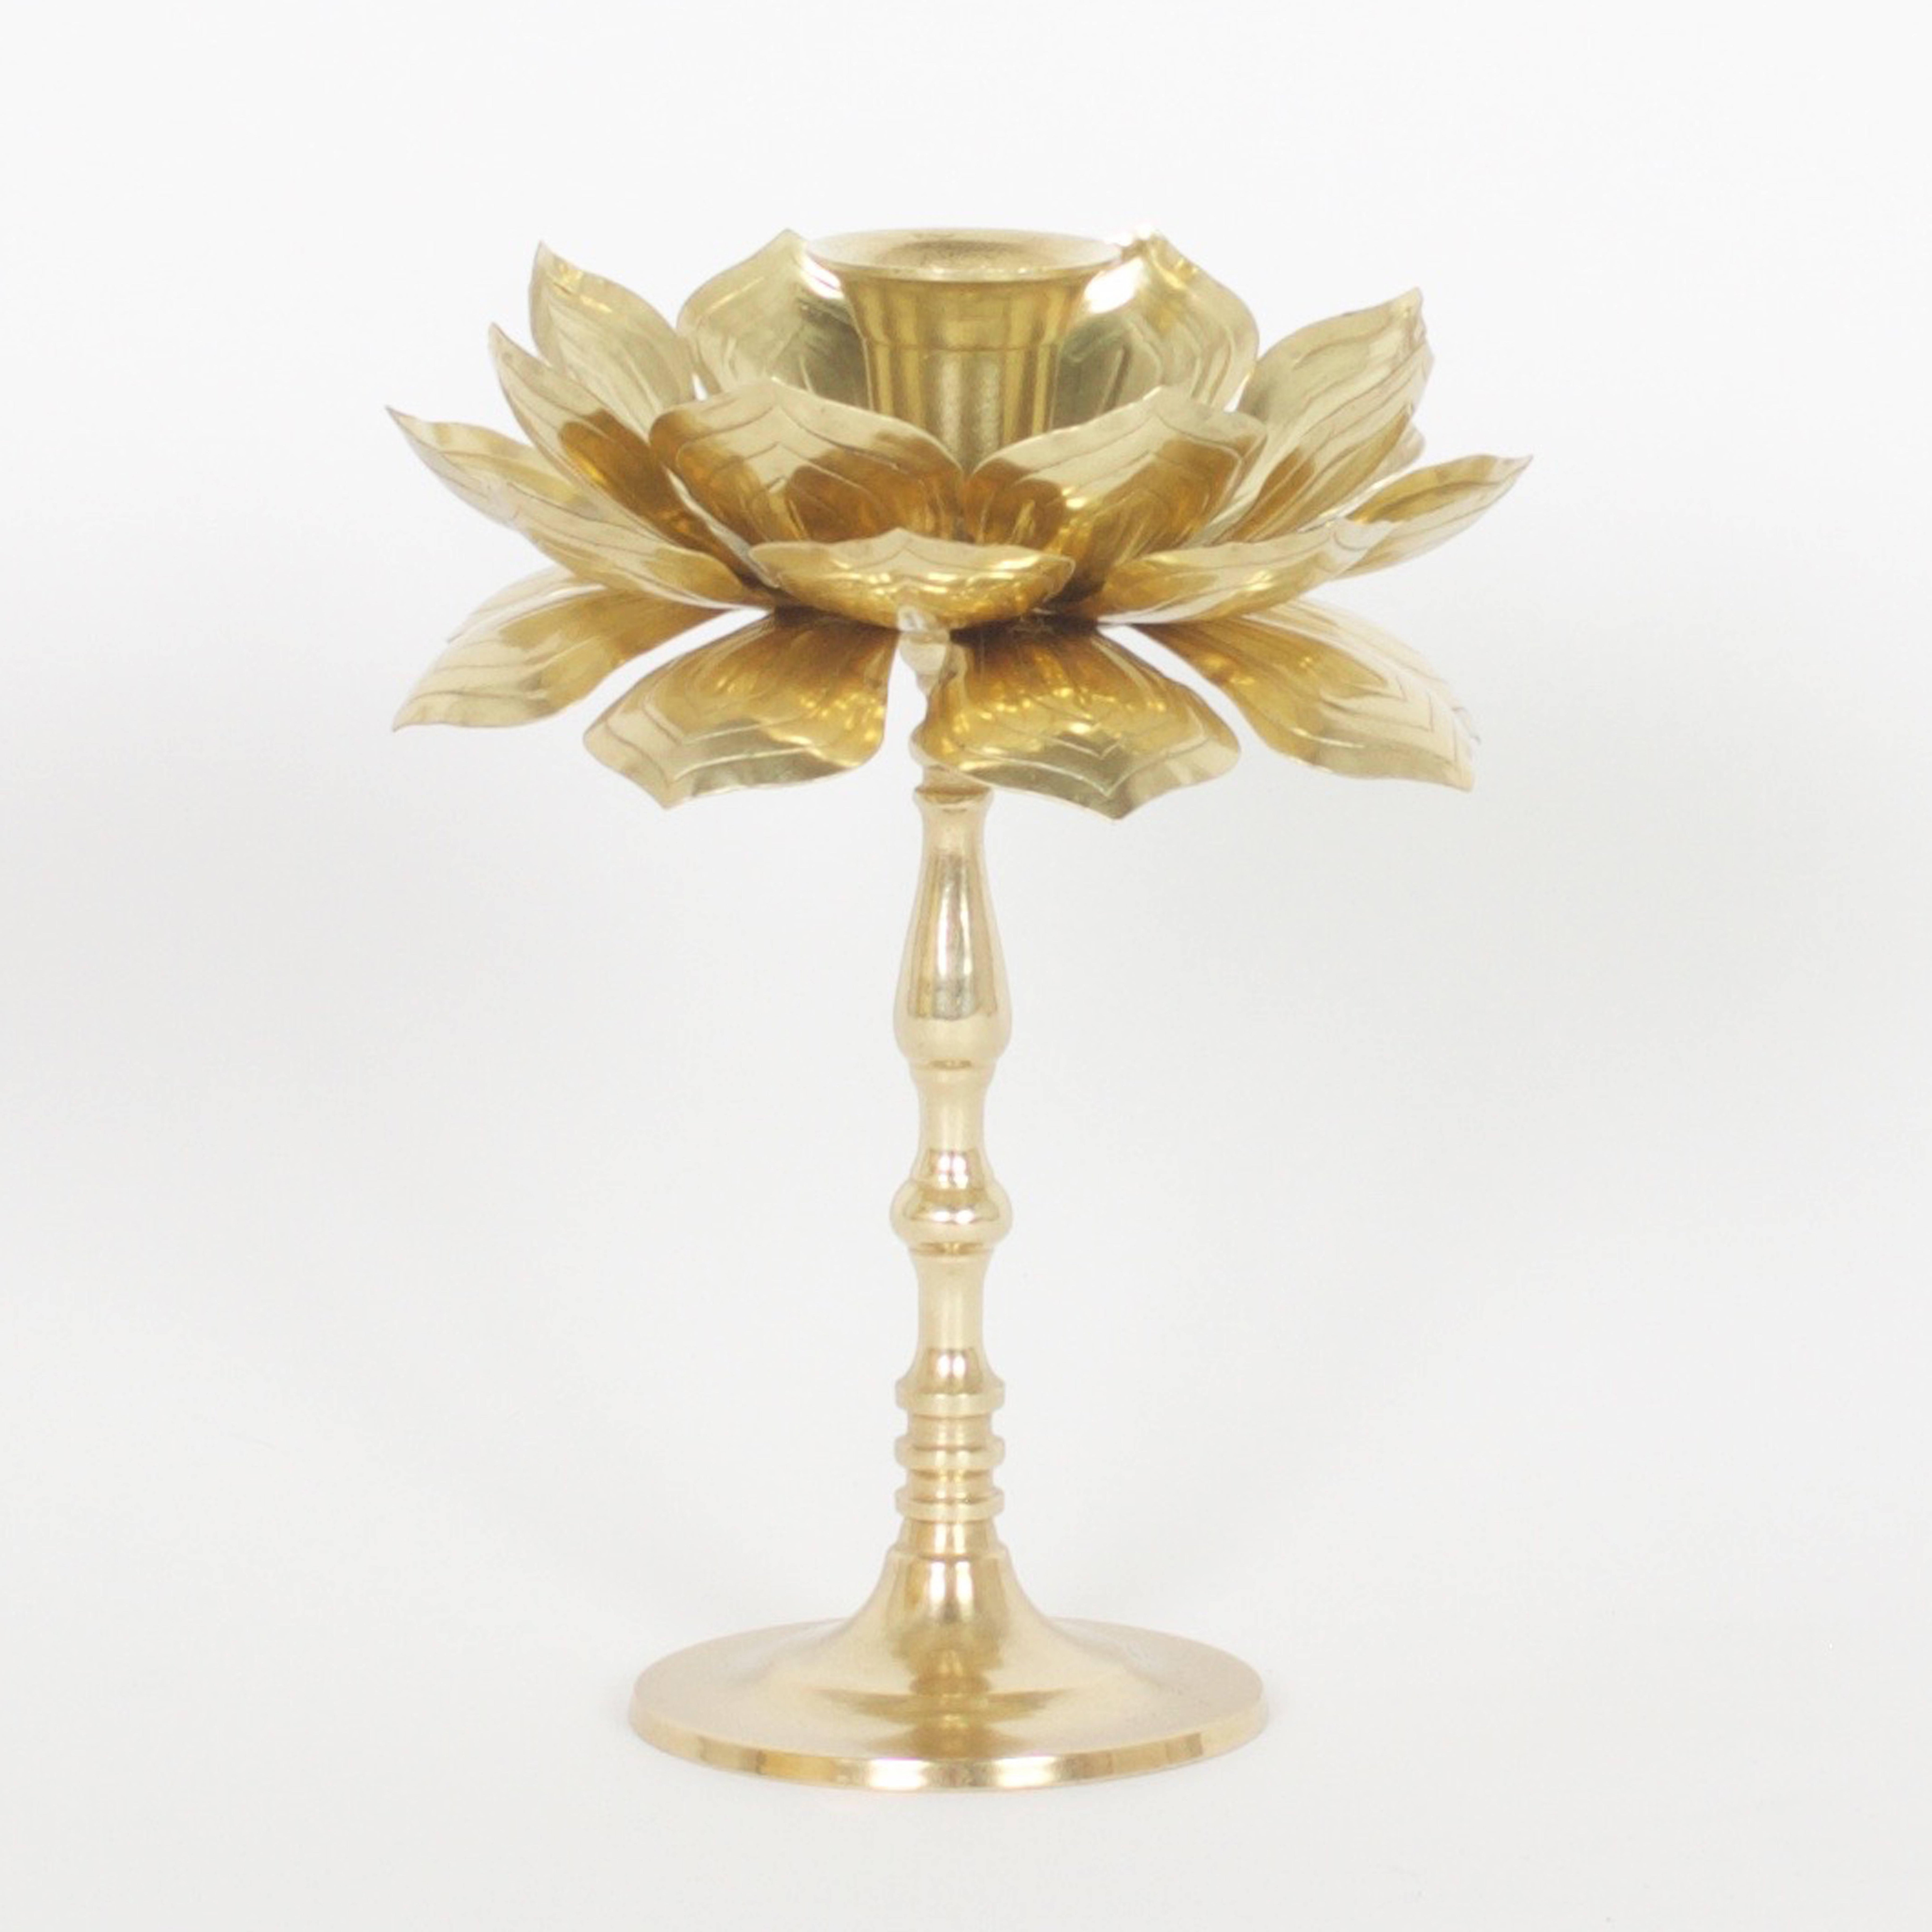 Two Mid-Century brass lotus candle holders, both having three layers of leaves holding a candle cup. One lotus presented on a turn classical stem and the other lotus a turned foot. These candlesticks are an exotic mood waiting to happen. Probably